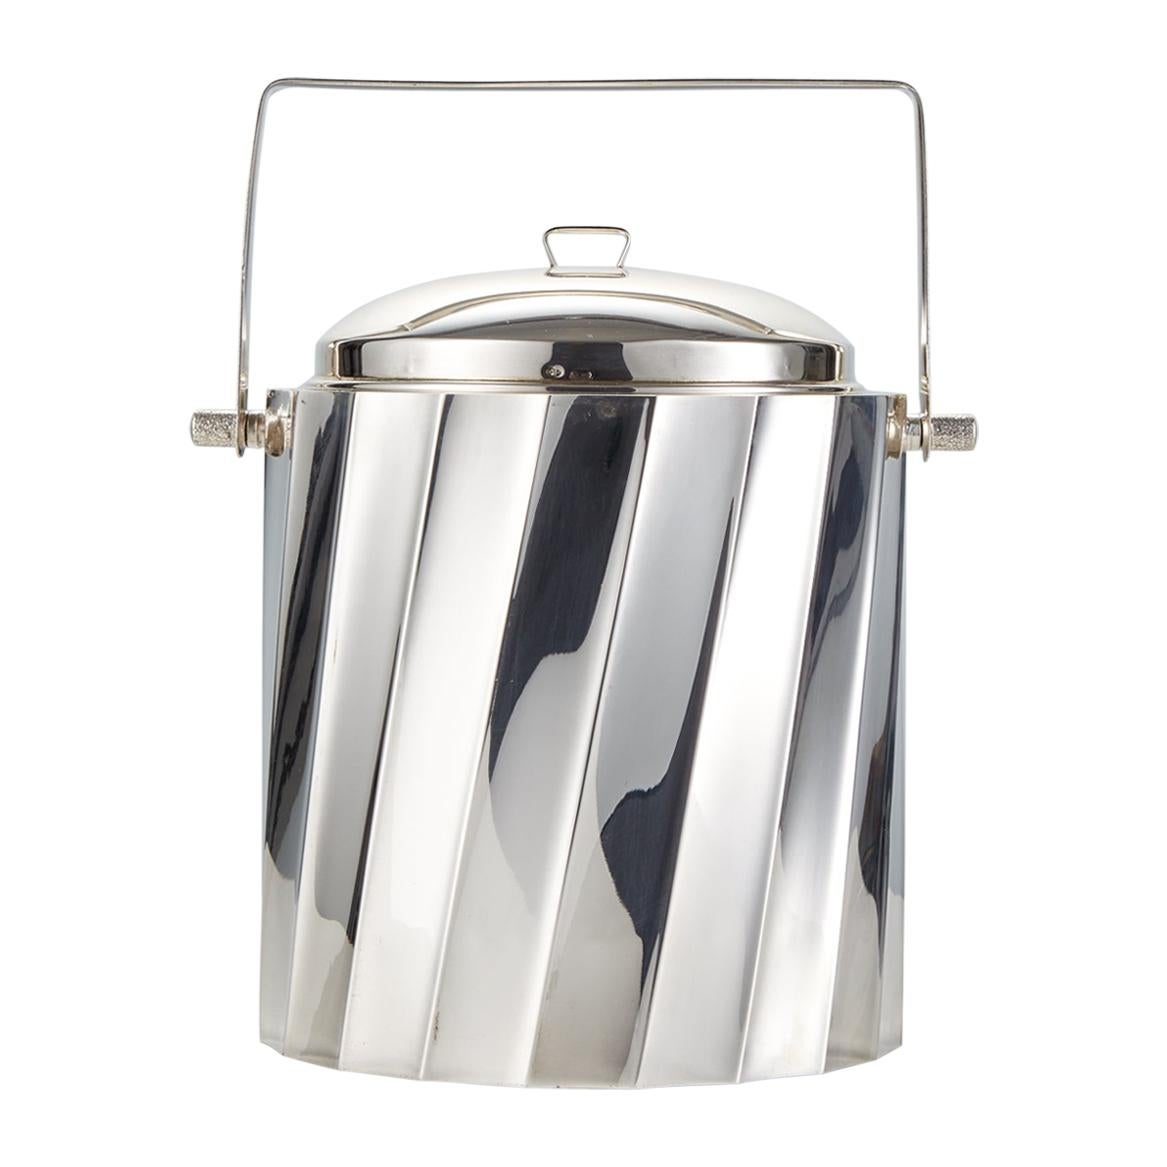 Mid-20th Century Sterling Silver Ice Bucket by Cartier Circa 1960